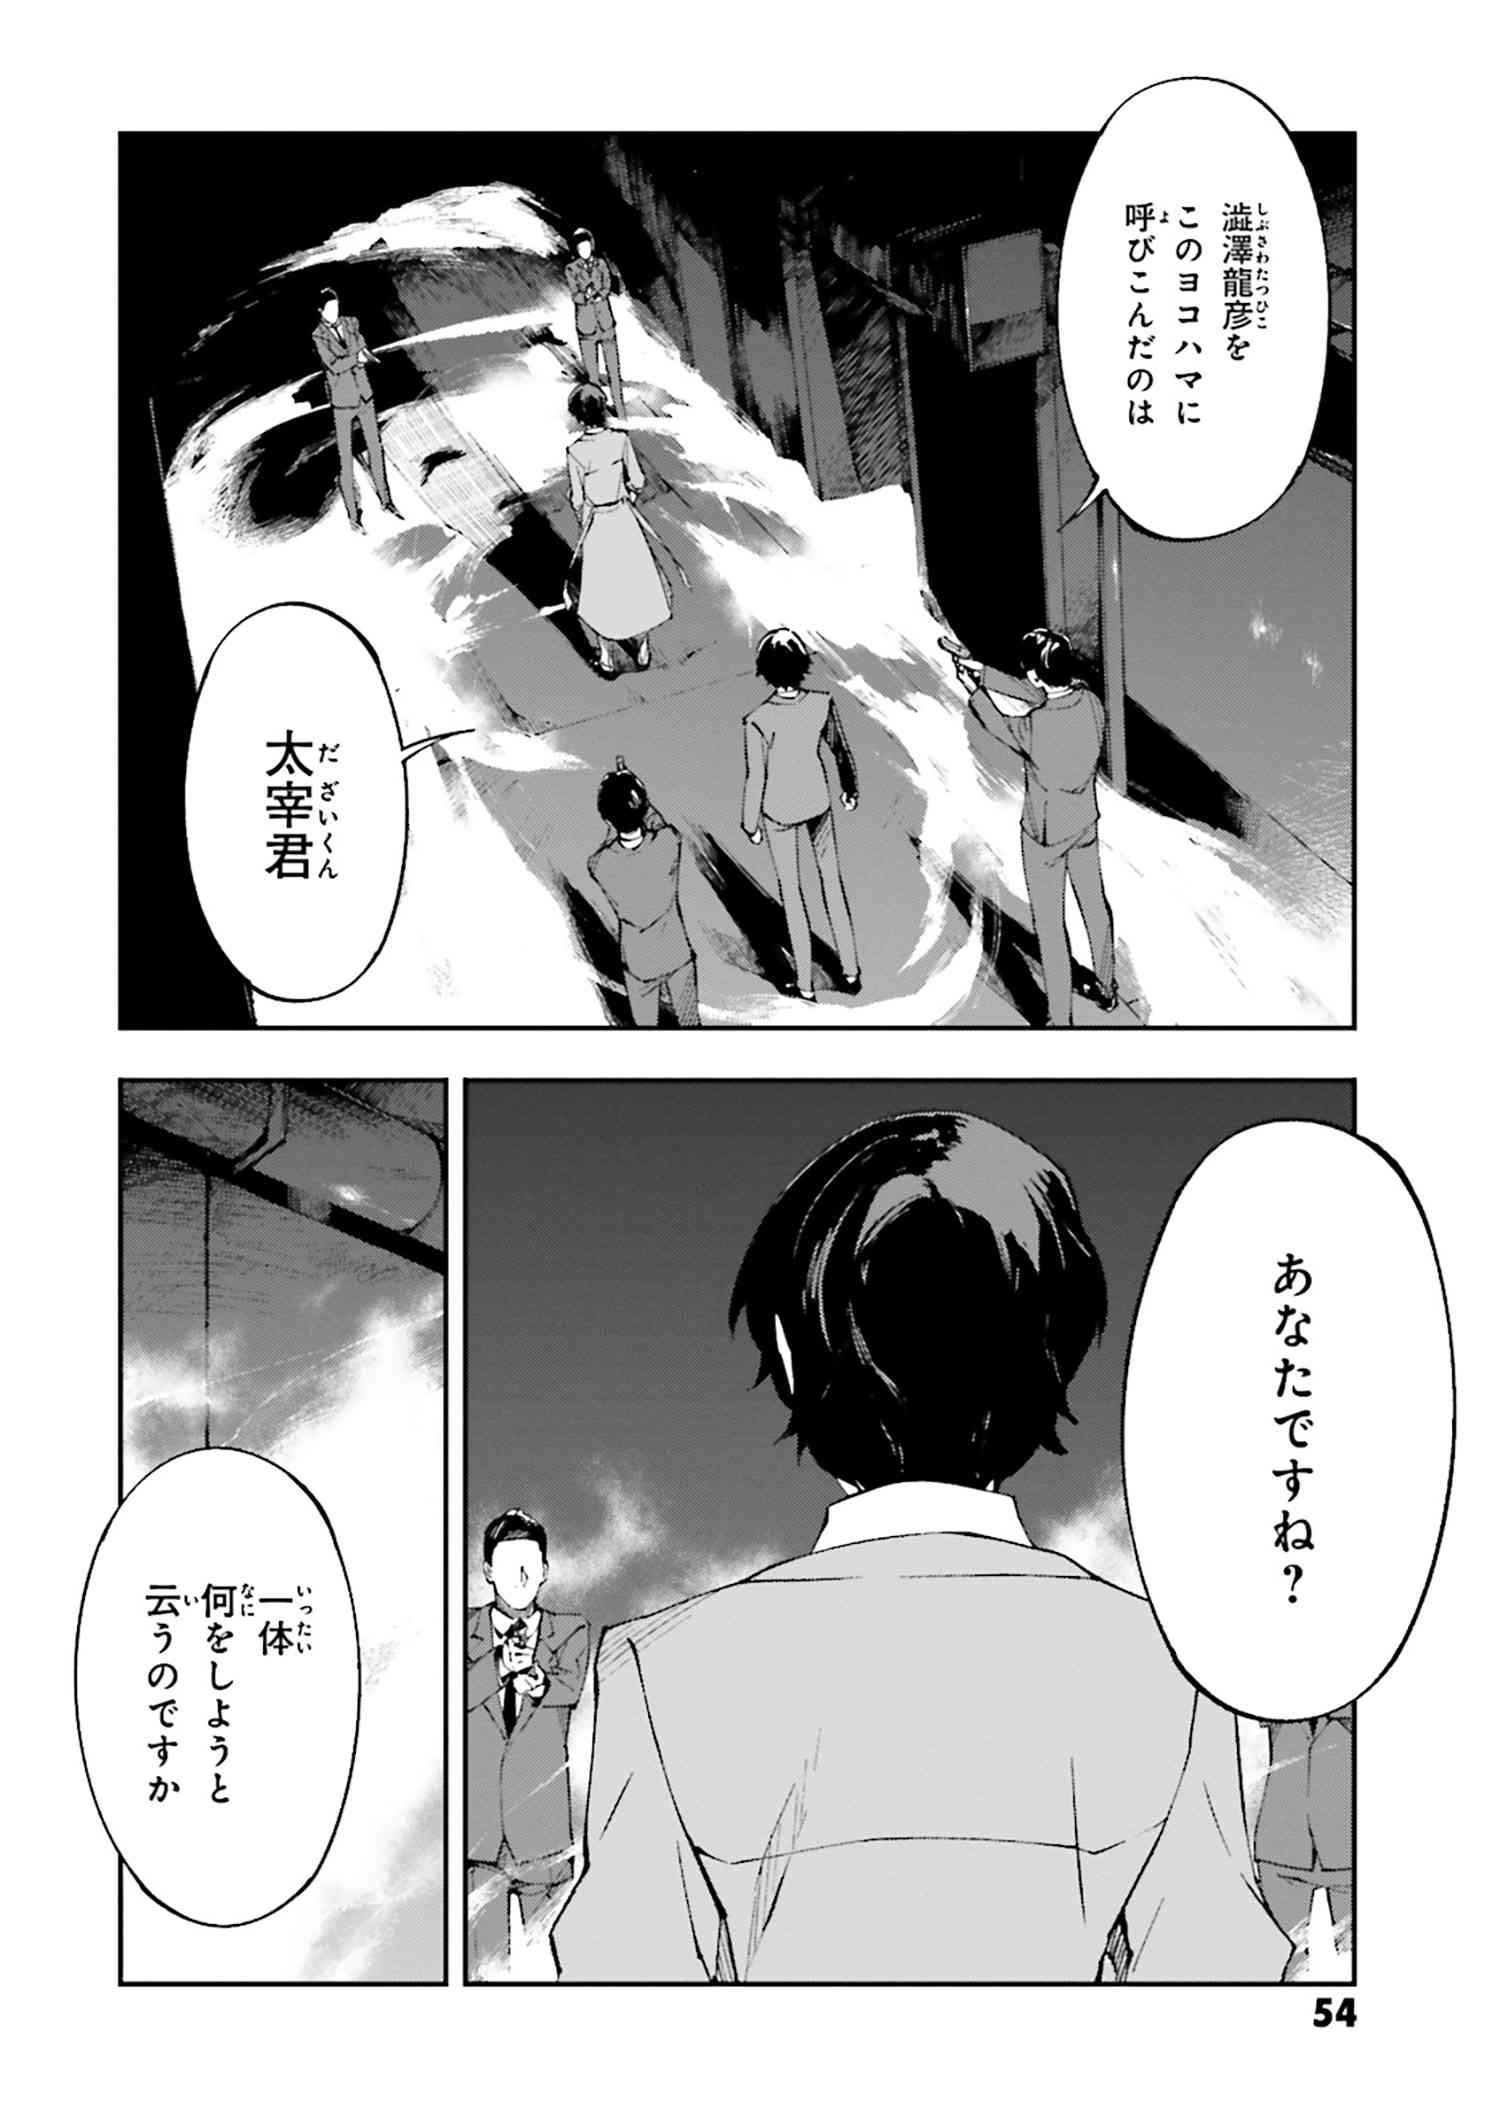 Bungou Stray Dogs: Dead Apple - Chapter 1-2 - Page 23